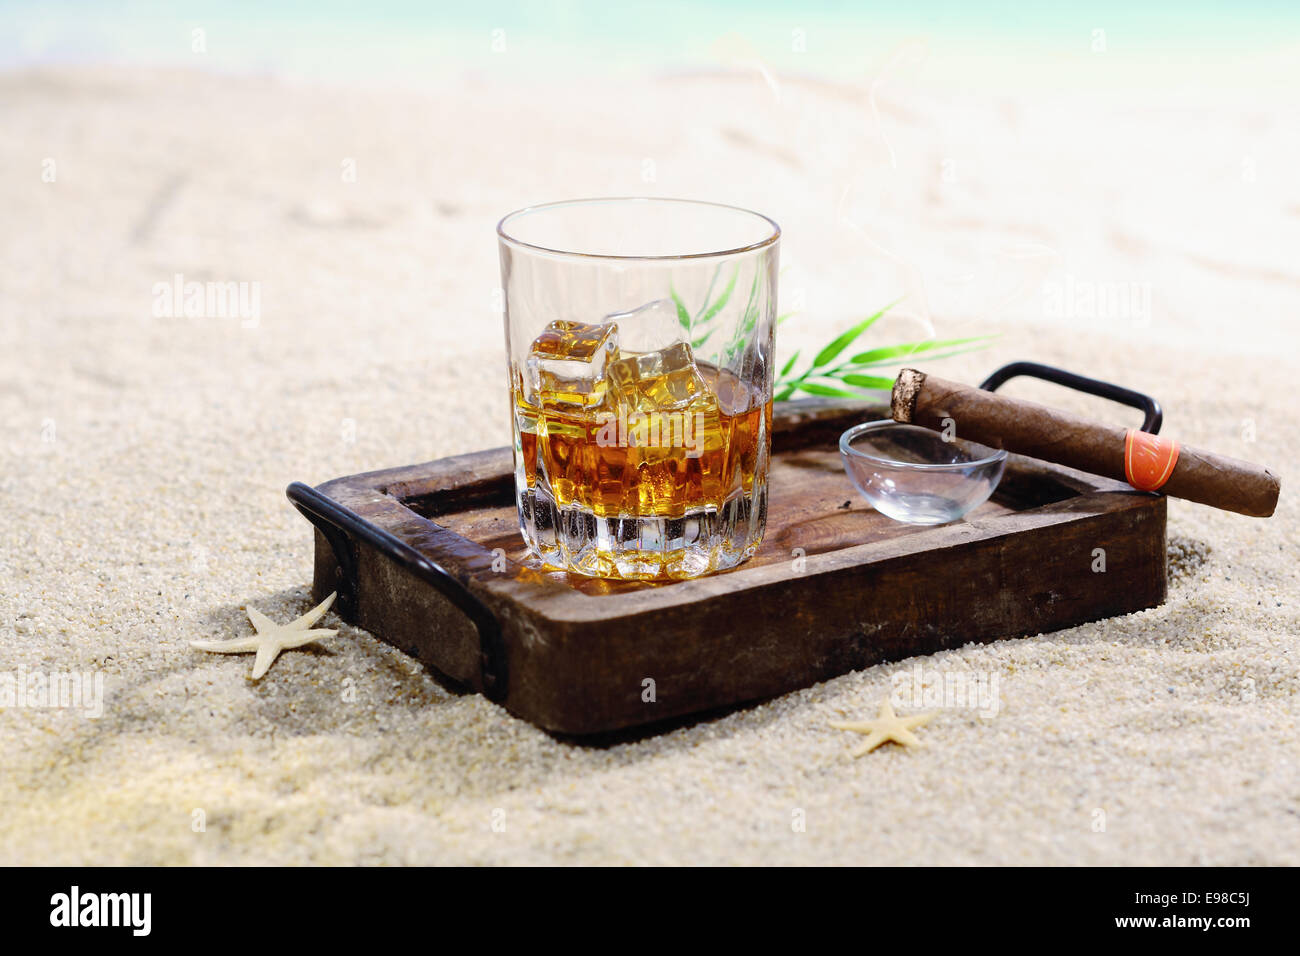 Beautiful image of scotch on the rocks in a classy wooden tray on a sandy beach. Stock Photo